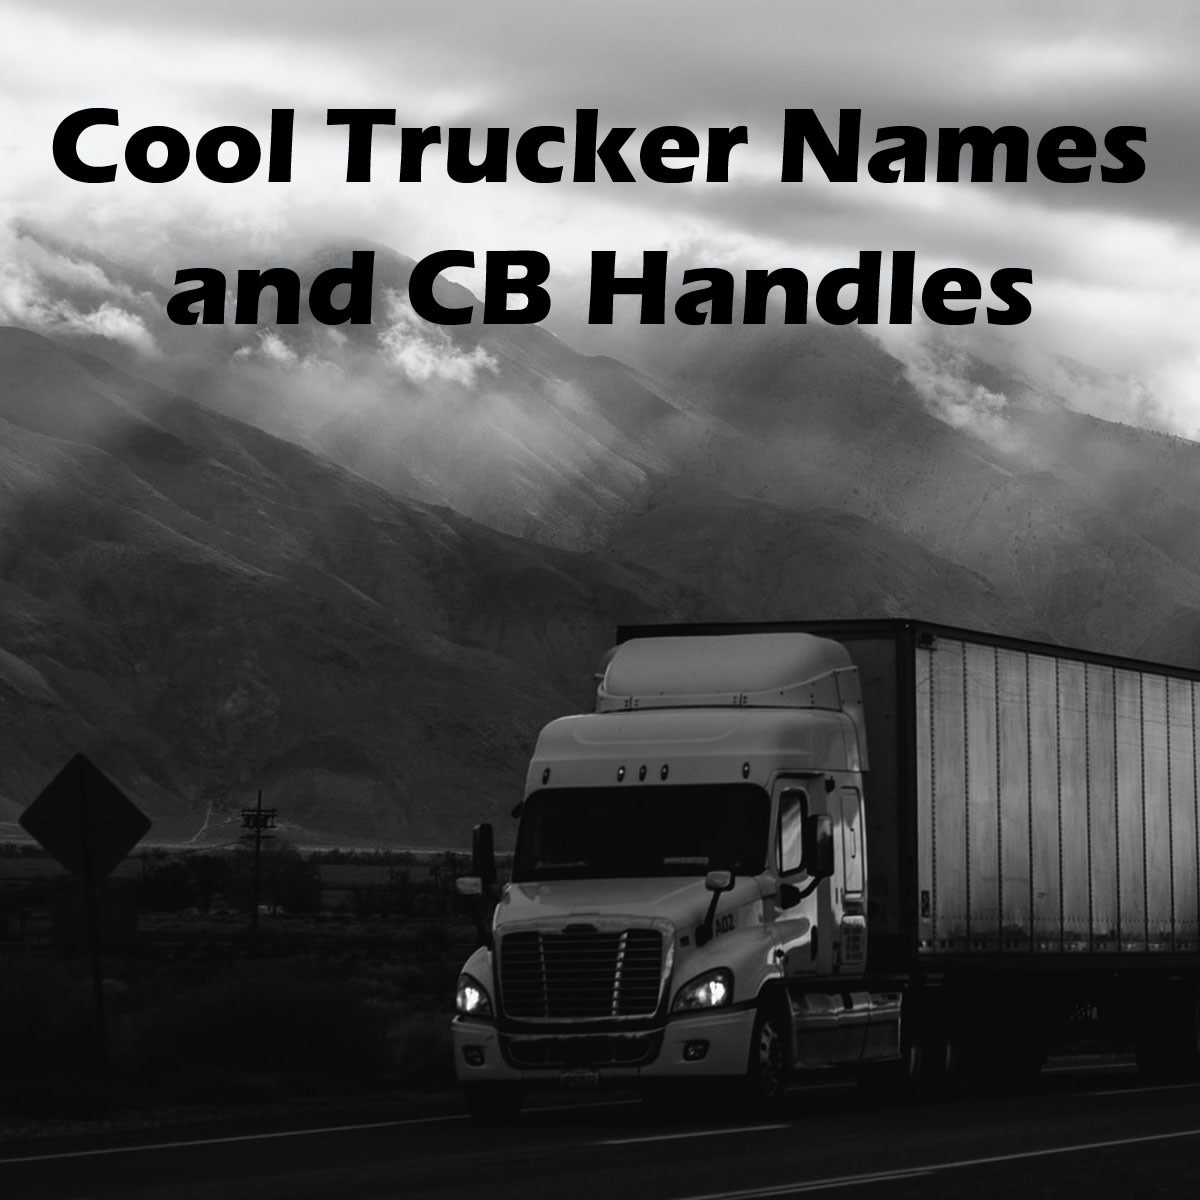 Cool Trucker Names and CB Handles